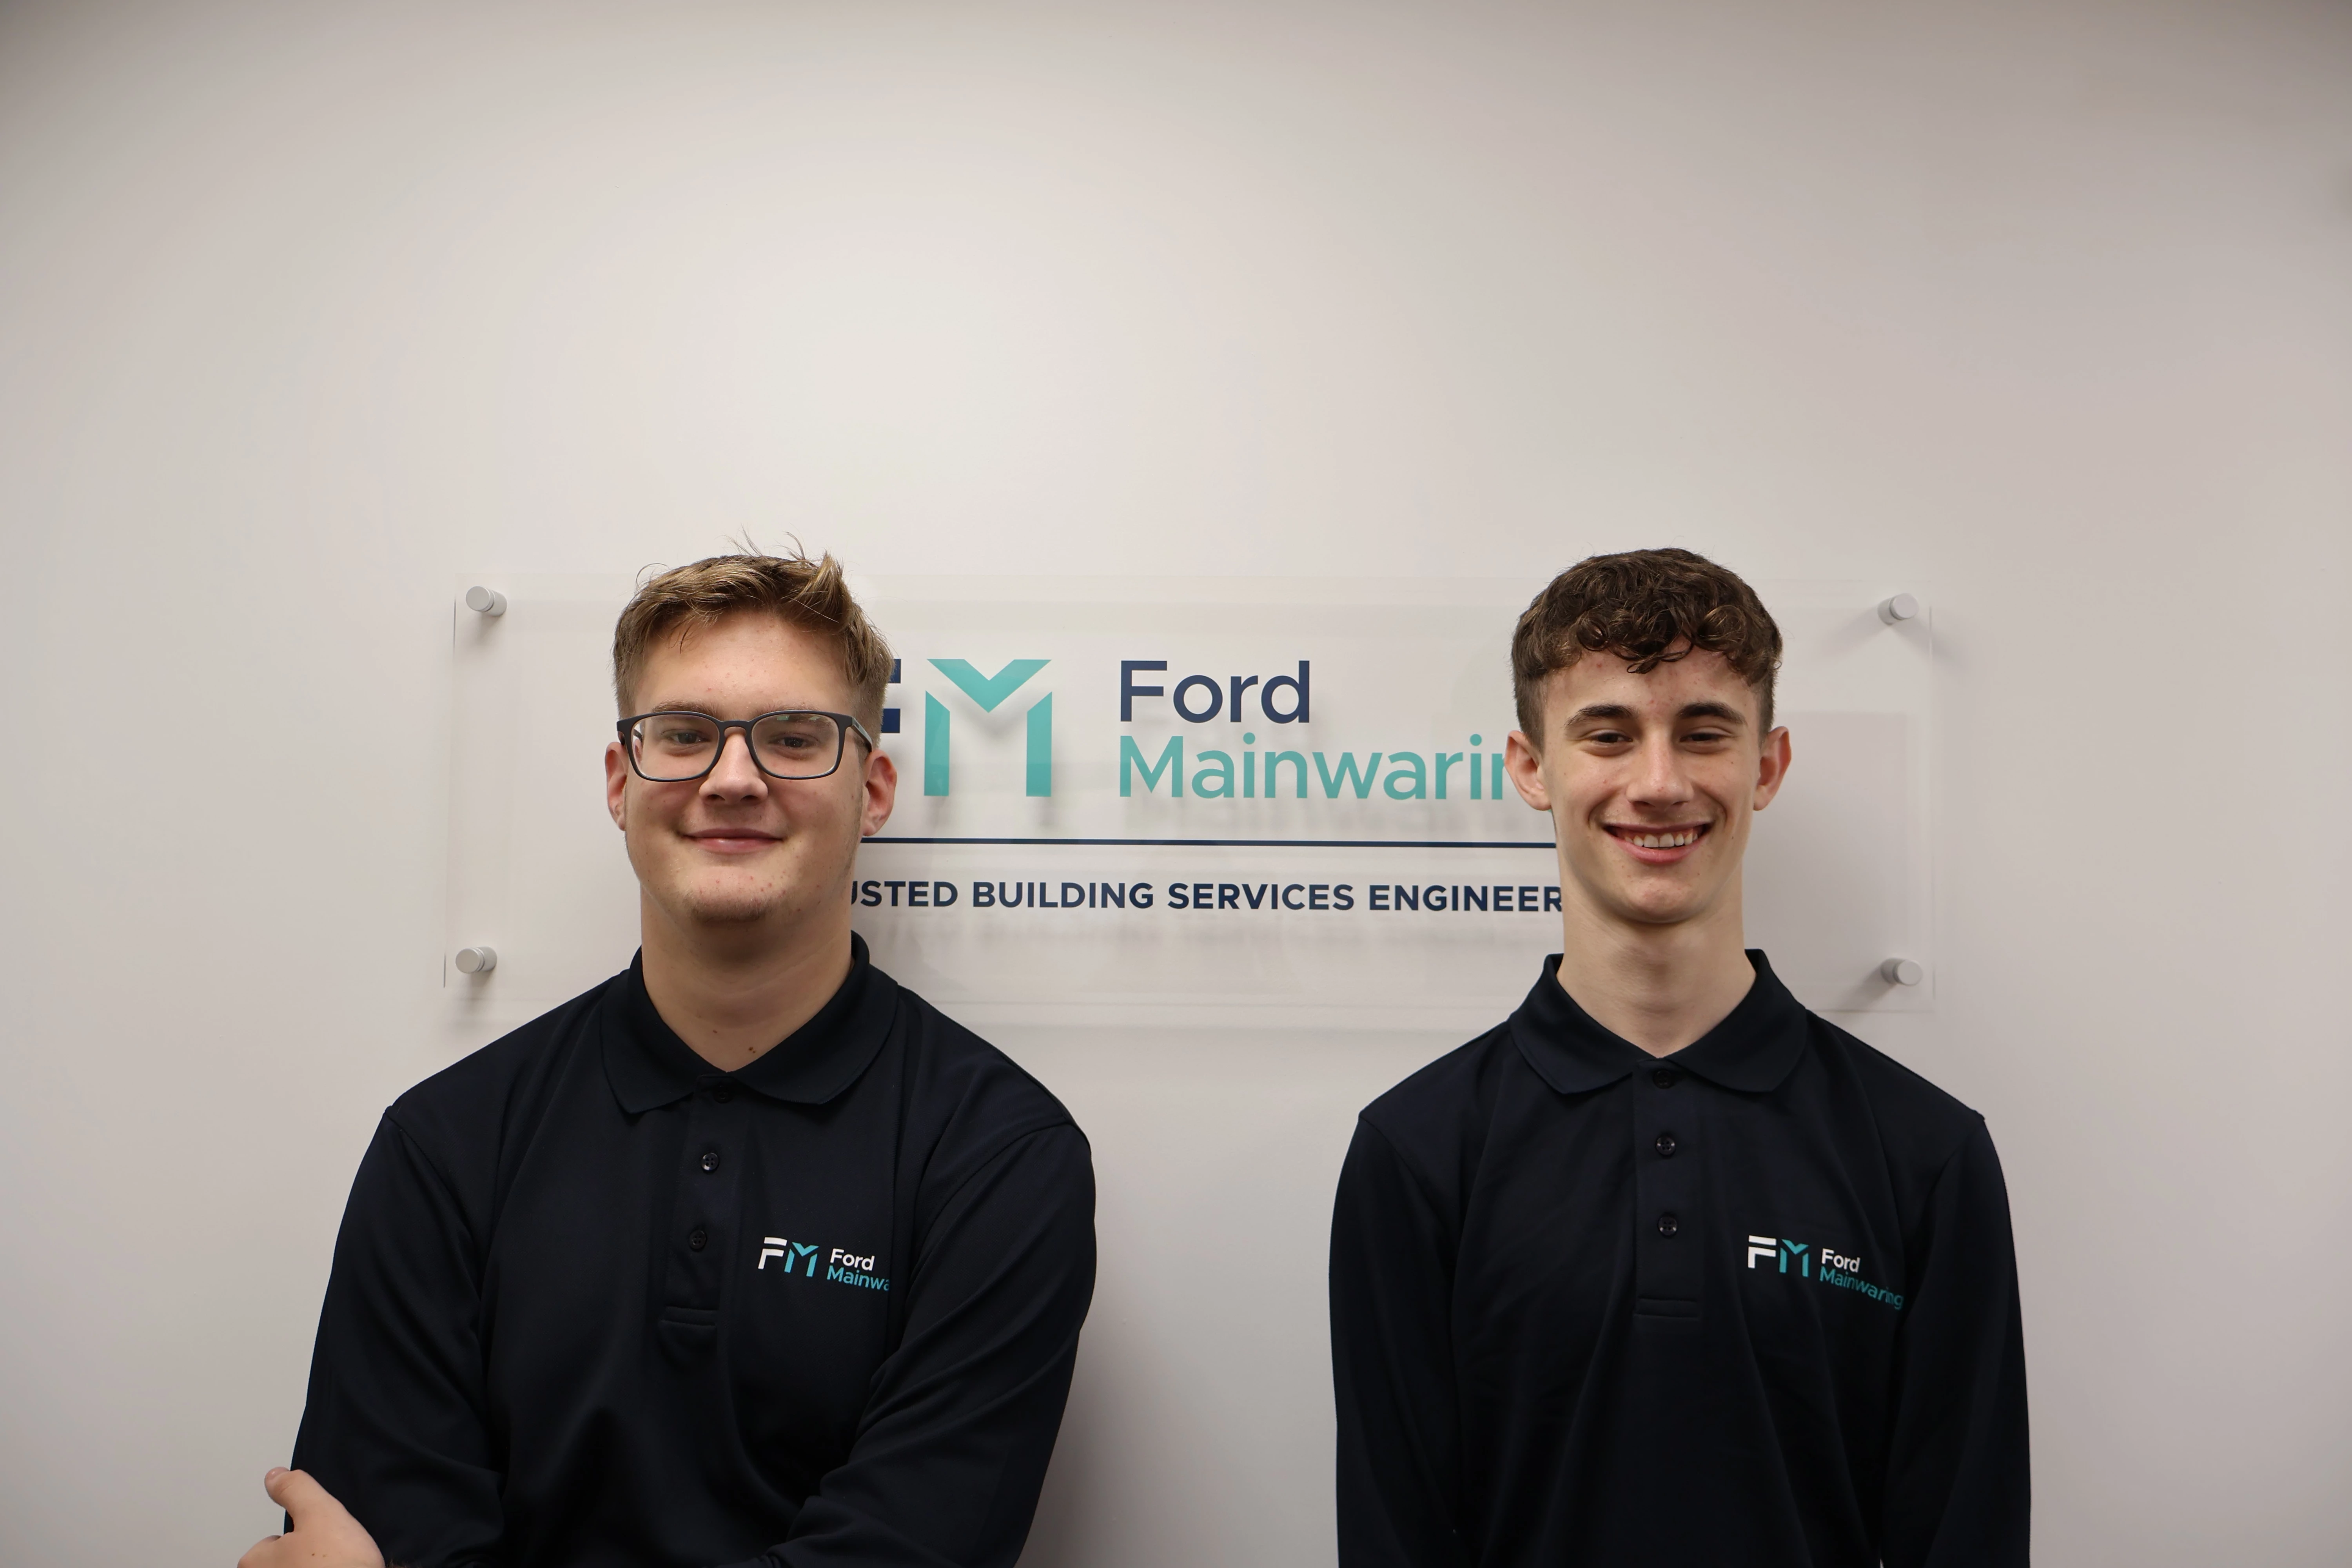 Ford Mainwaring's new apprentices.